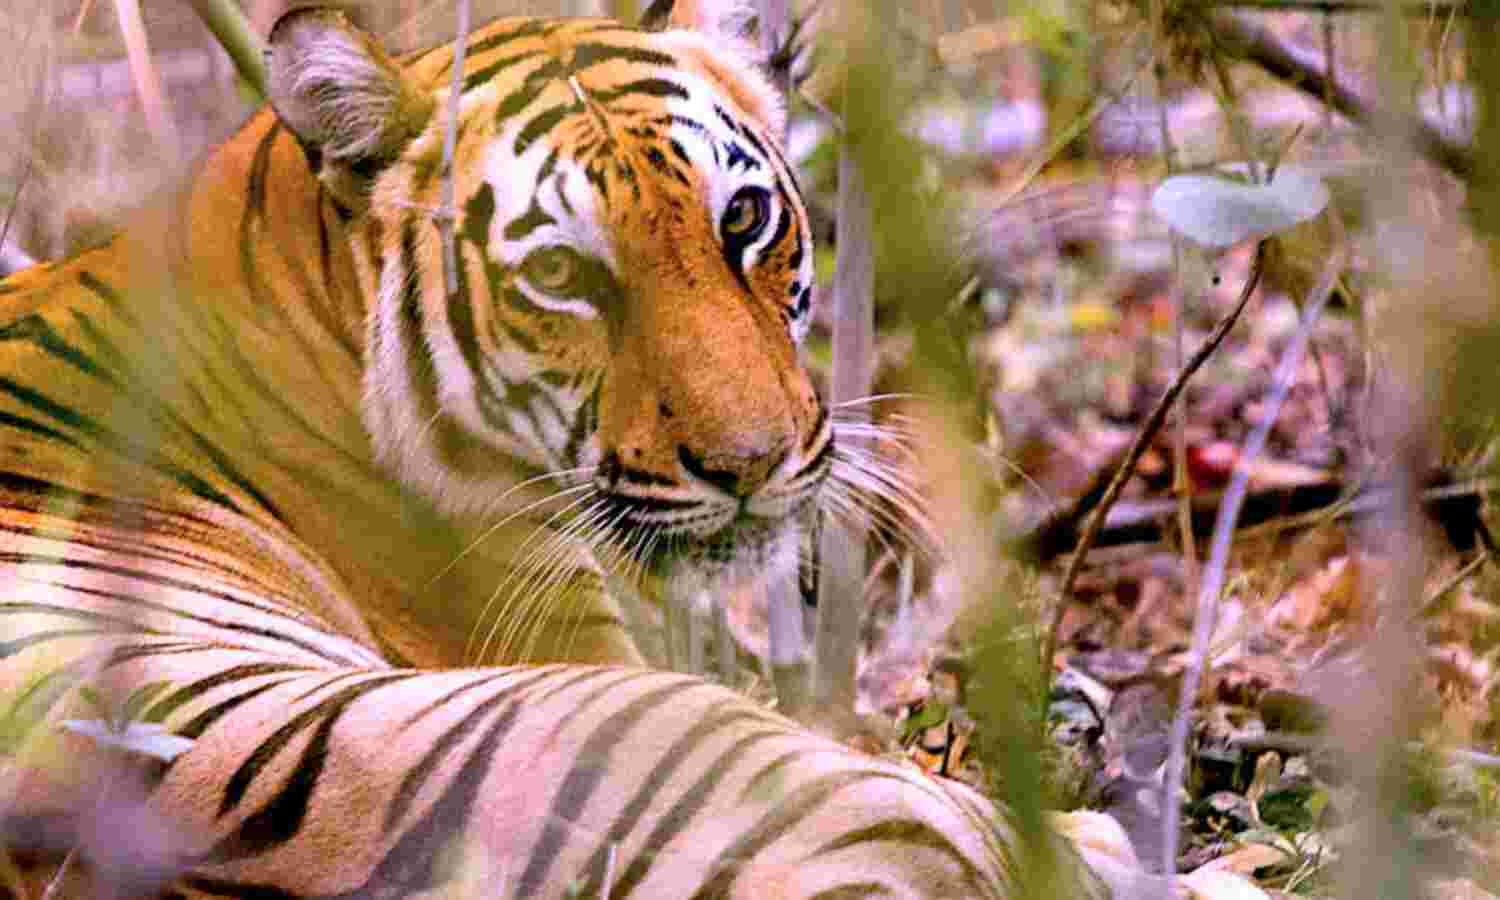 No Tigers In Bangladesh Sundarbans By 2070, As Region Faces 100% Habitat  Loss Over Next 50 Years